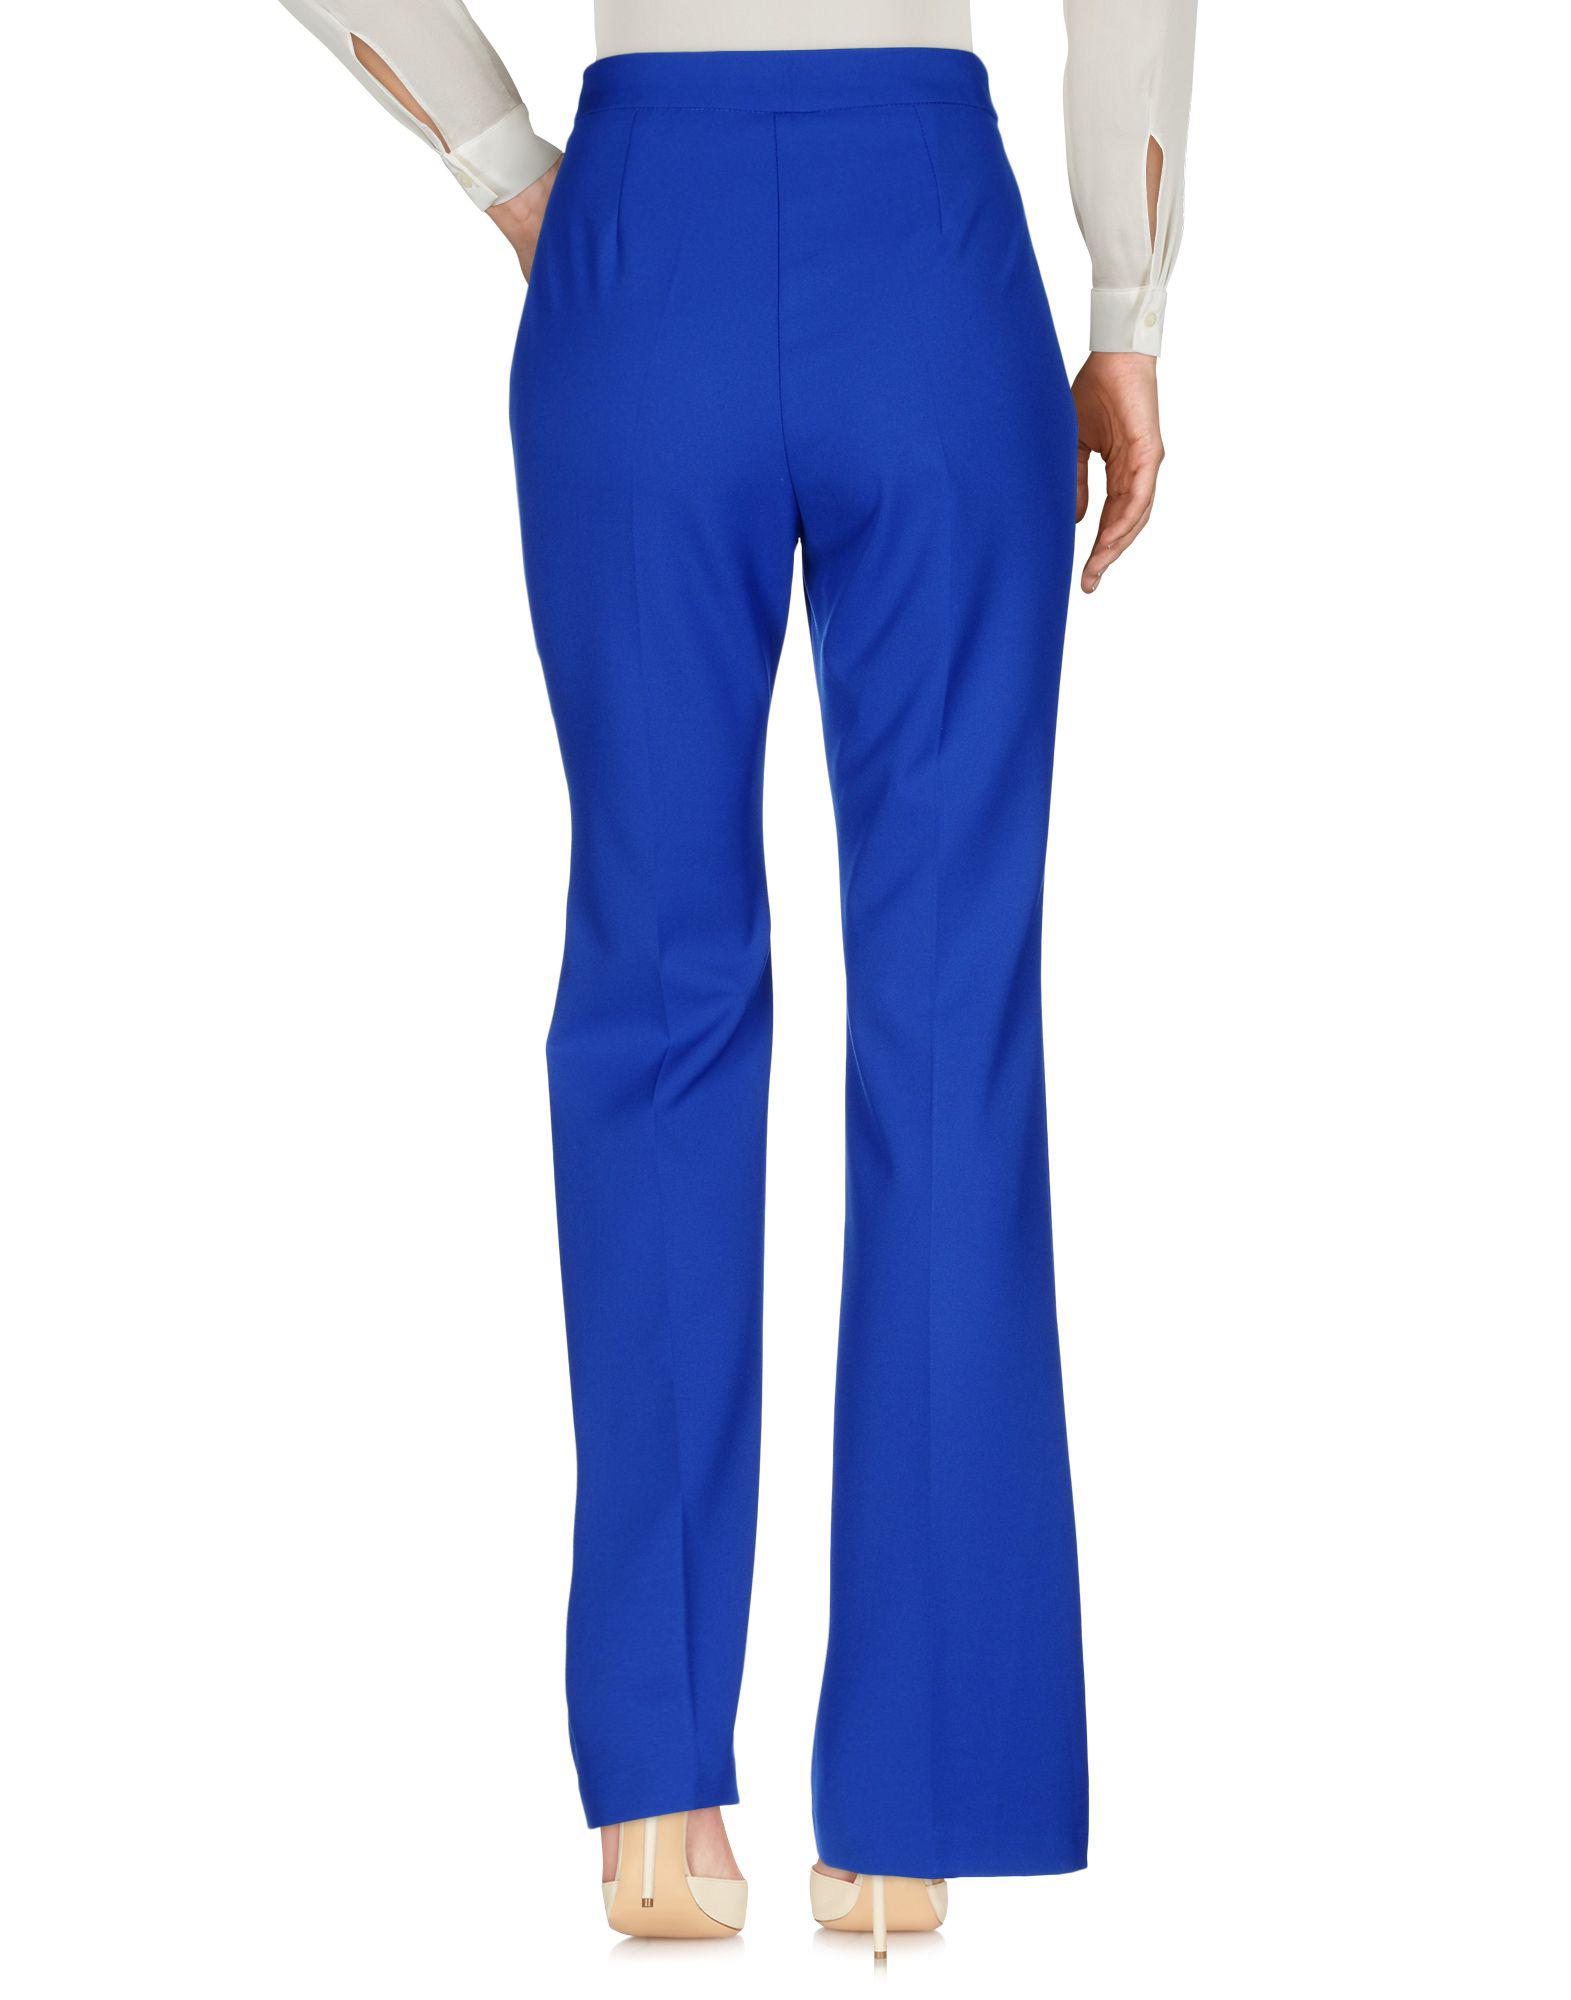 Twenty Easy By Kaos Synthetic Casual Pants in Blue - Lyst